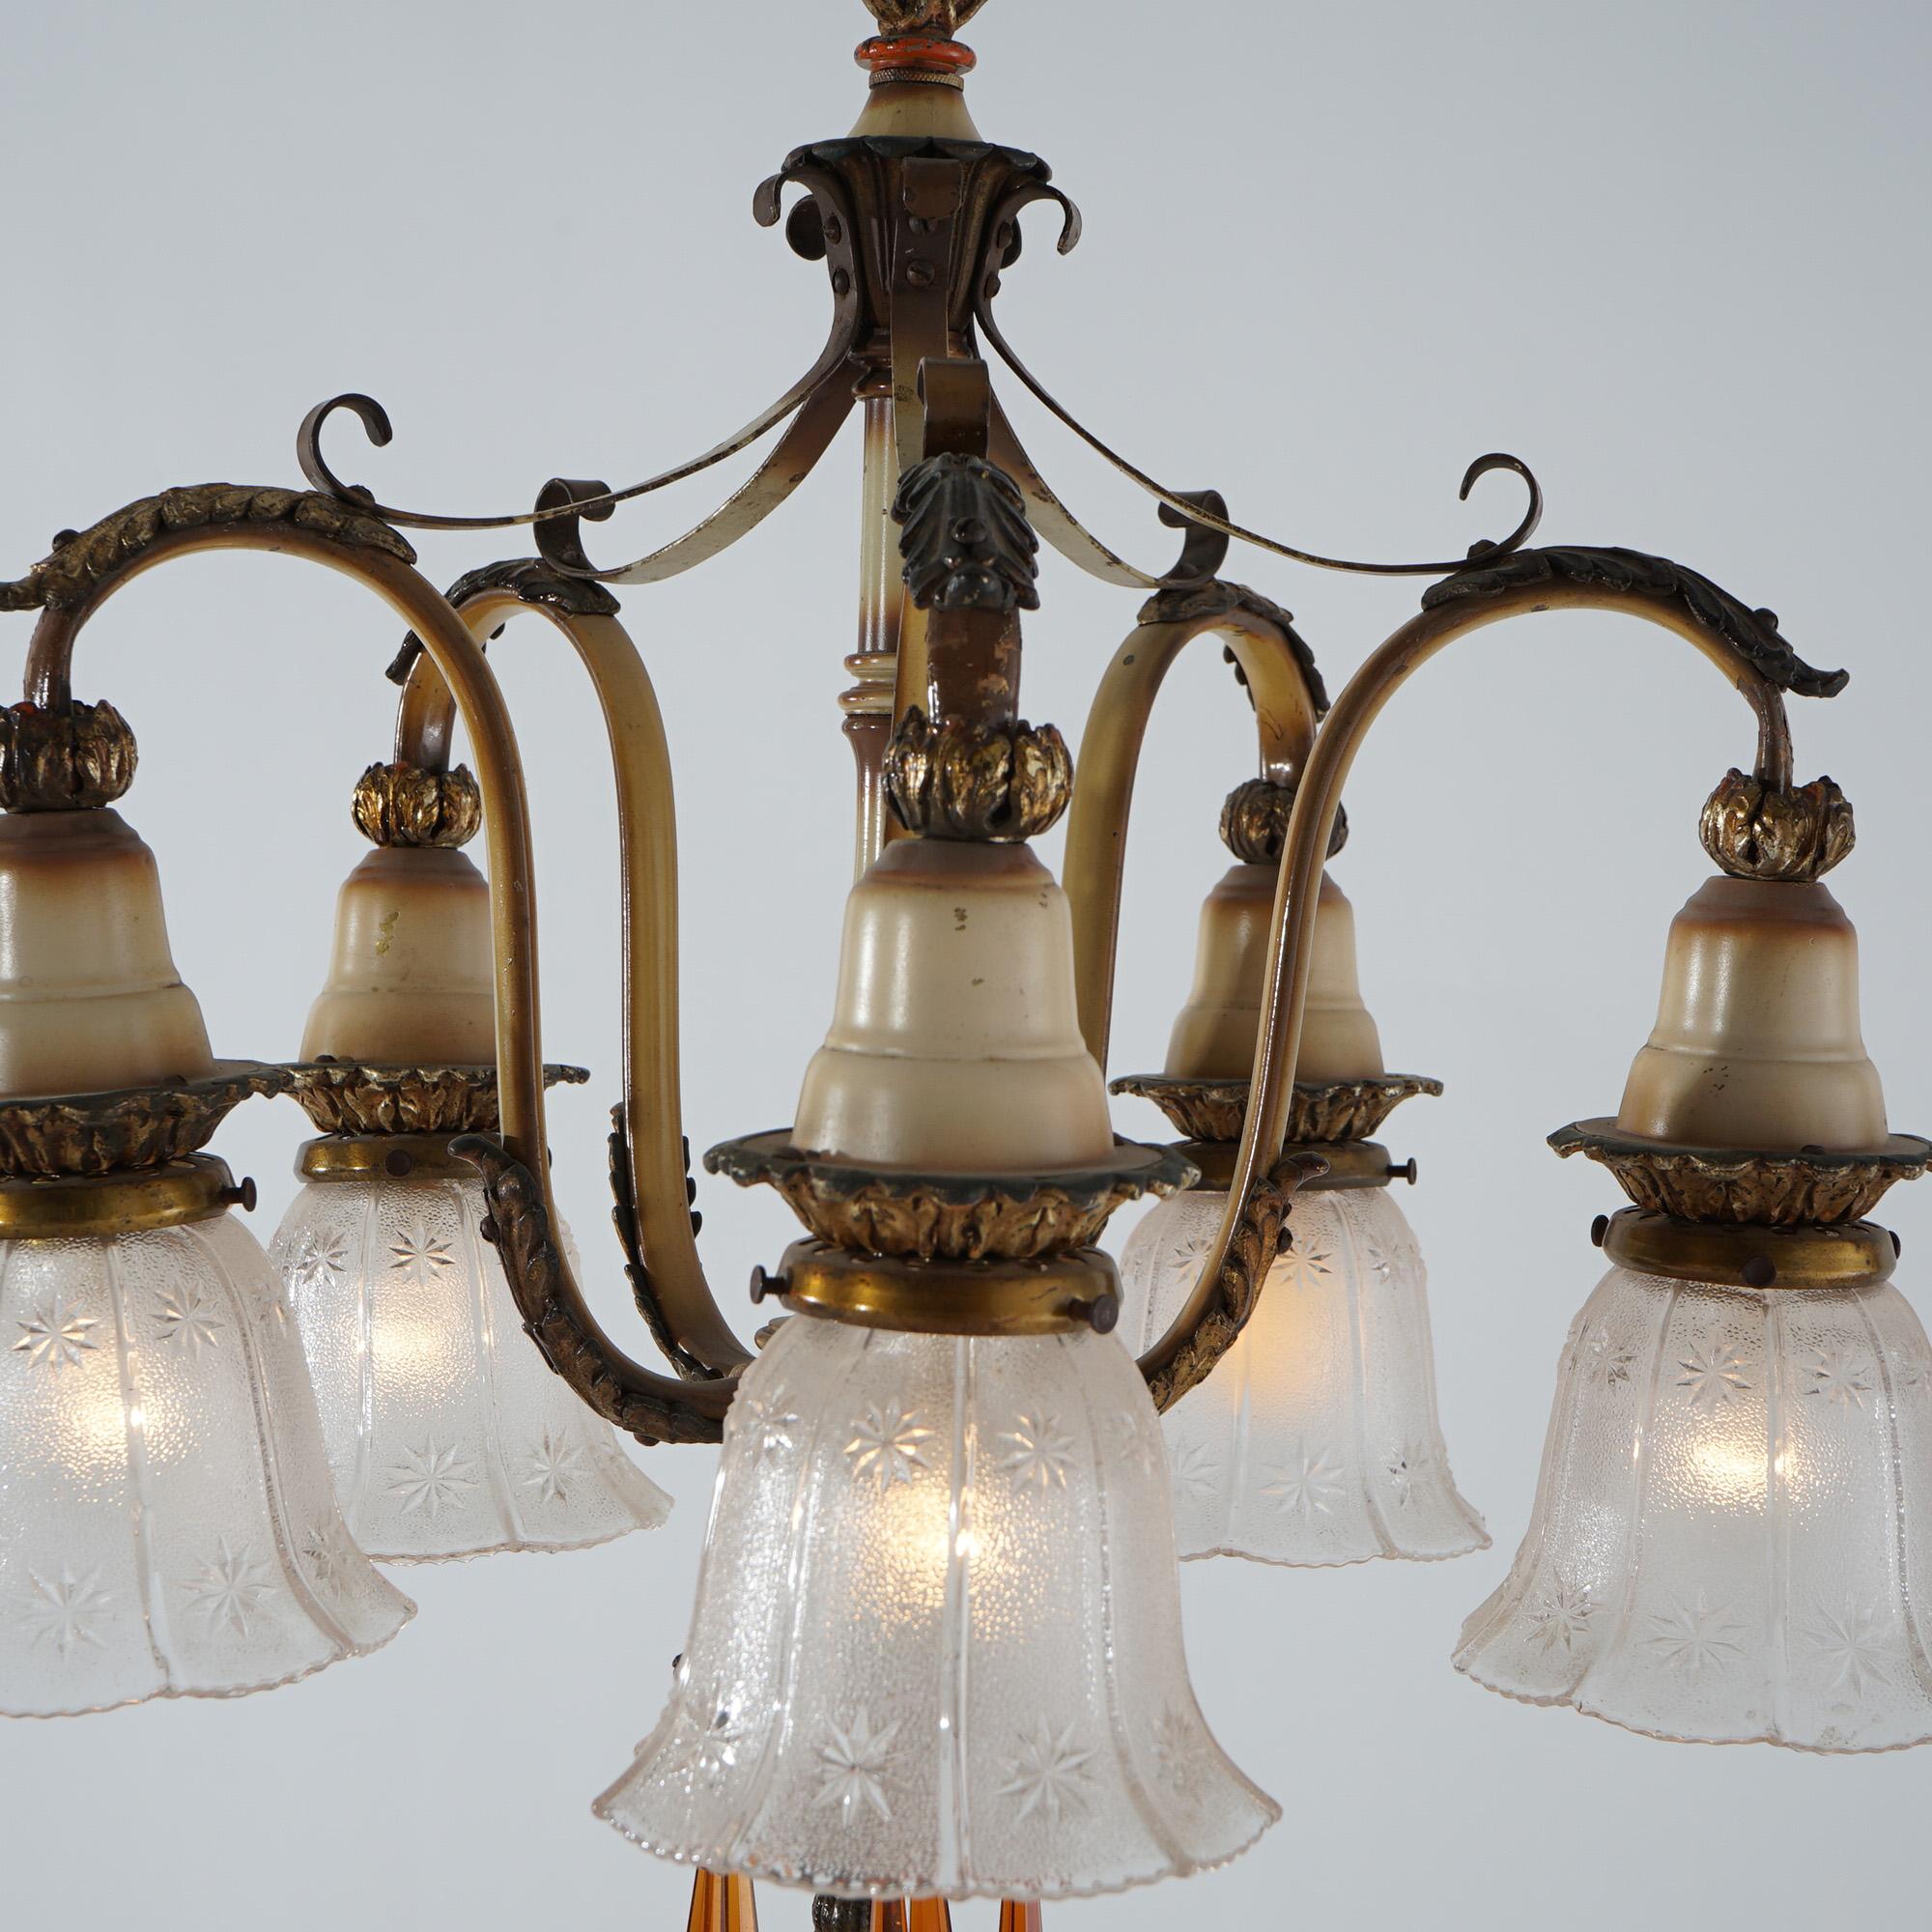 Antique Arts & Crafts Gilt & Polychromed Metal Five Light Hanging Fixture, c1920 In Good Condition For Sale In Big Flats, NY